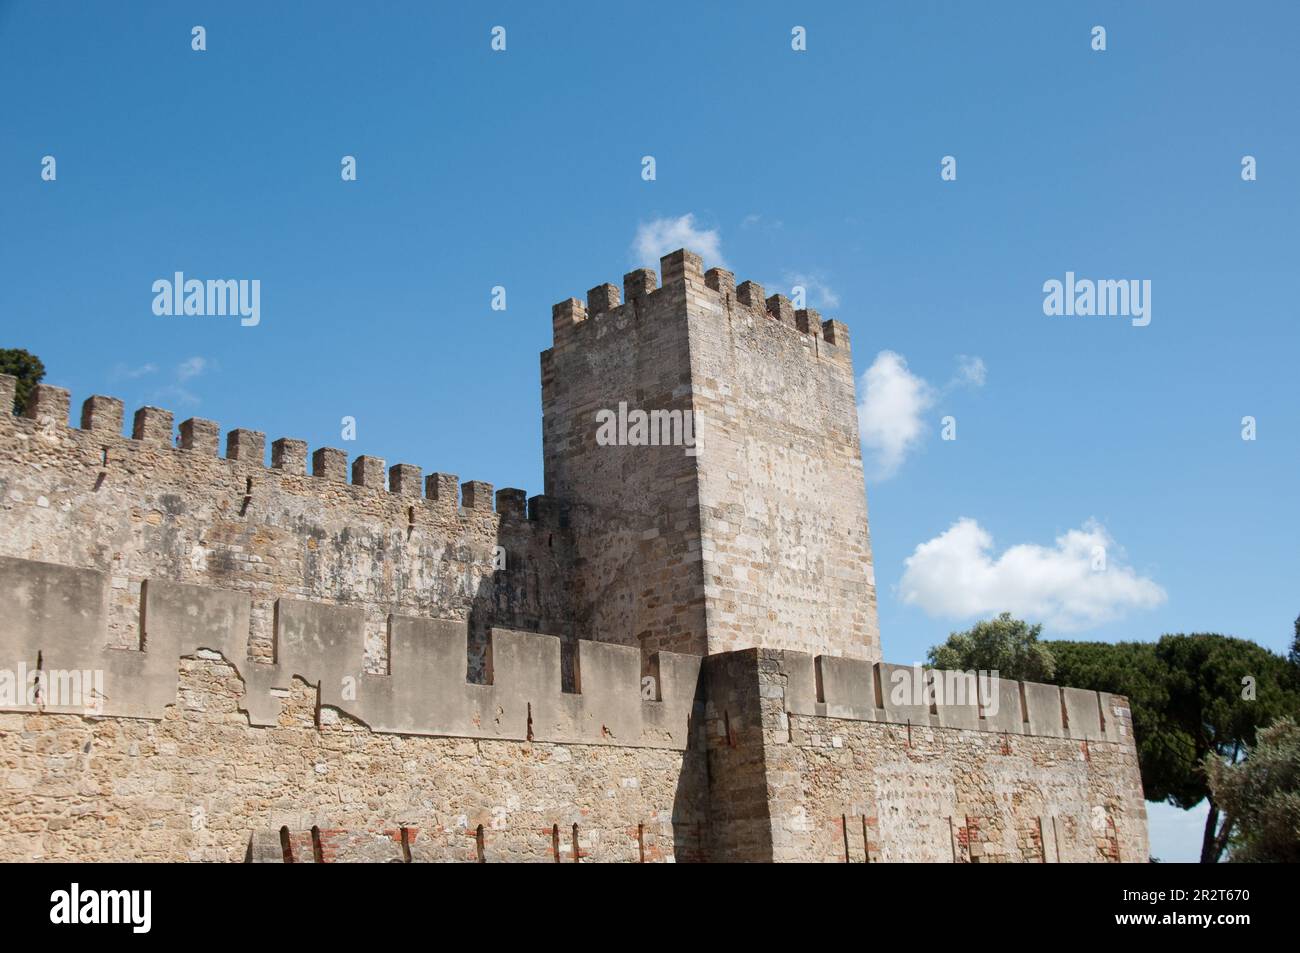 Outer wall and tower of St George's Castle, Lisbon, Portugal Stock Photo